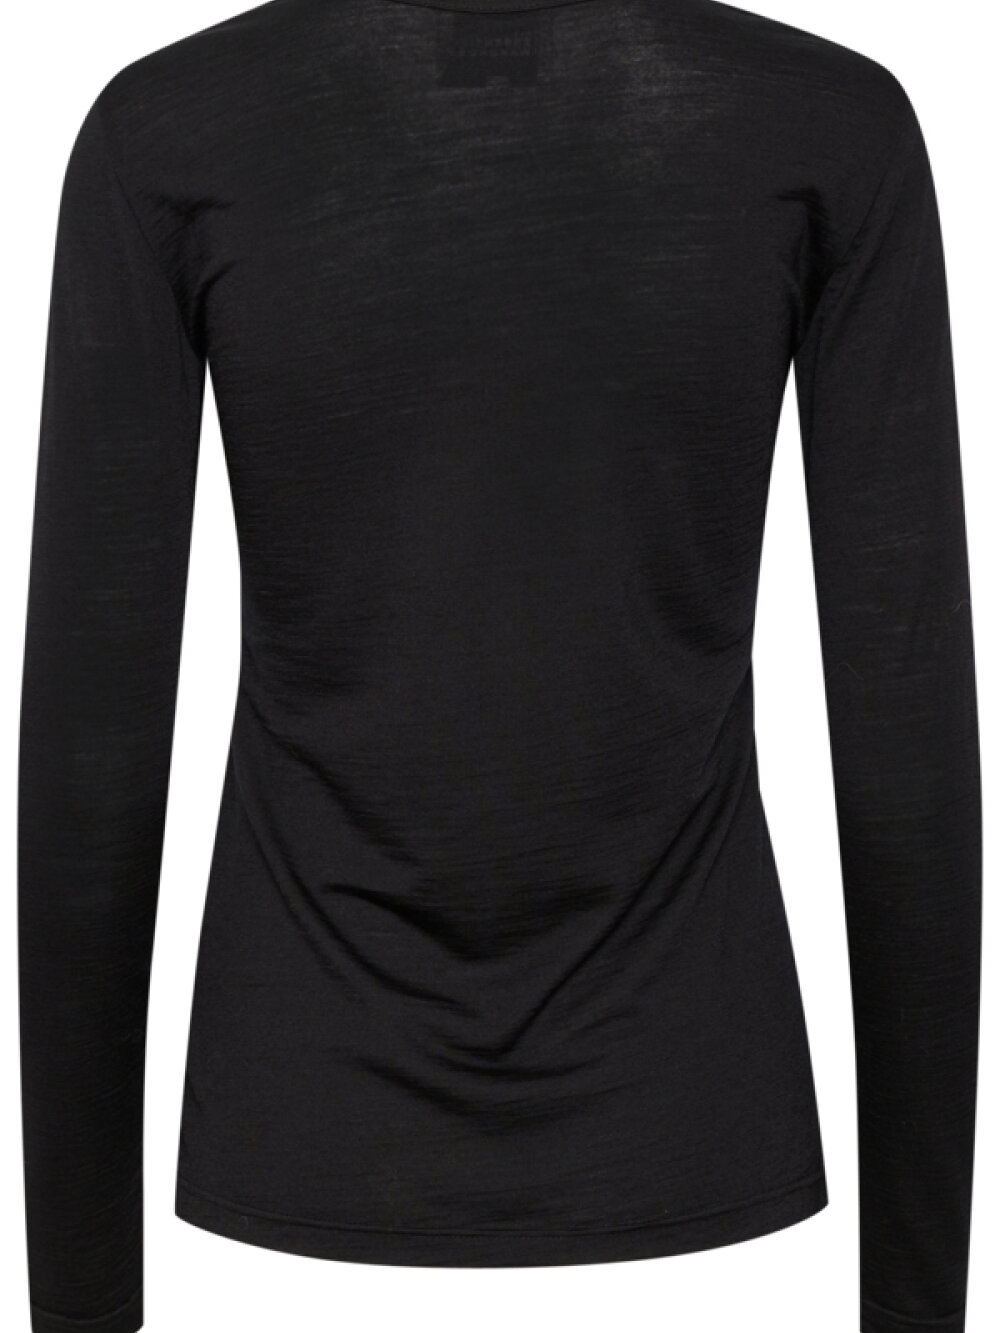 My Essential Wardrobe - 10 The Oneck Long Sleeve